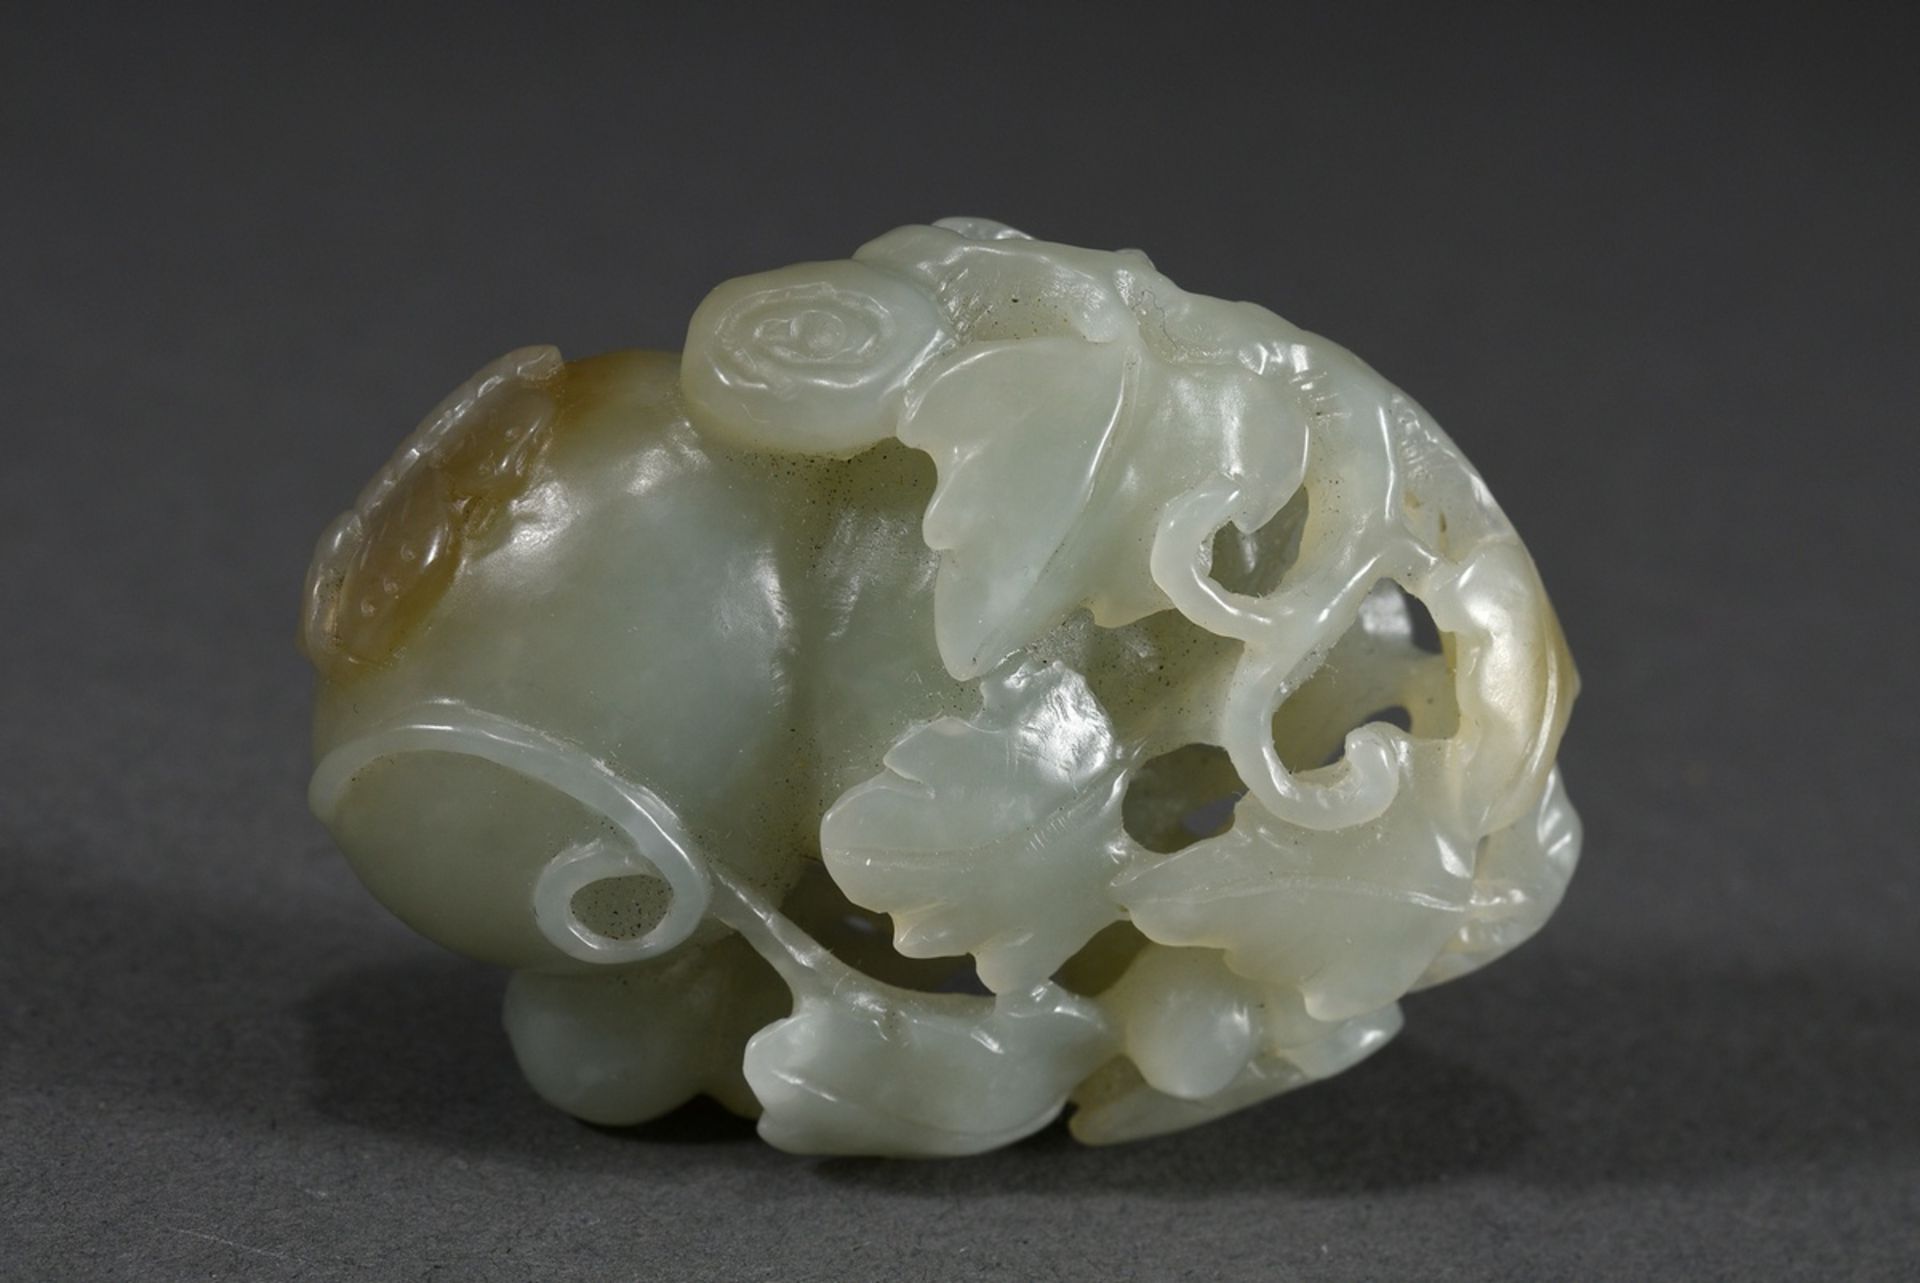 Bright jade toggle "Hulu gourds and butterfly", China, 6x4.2x1.8cm